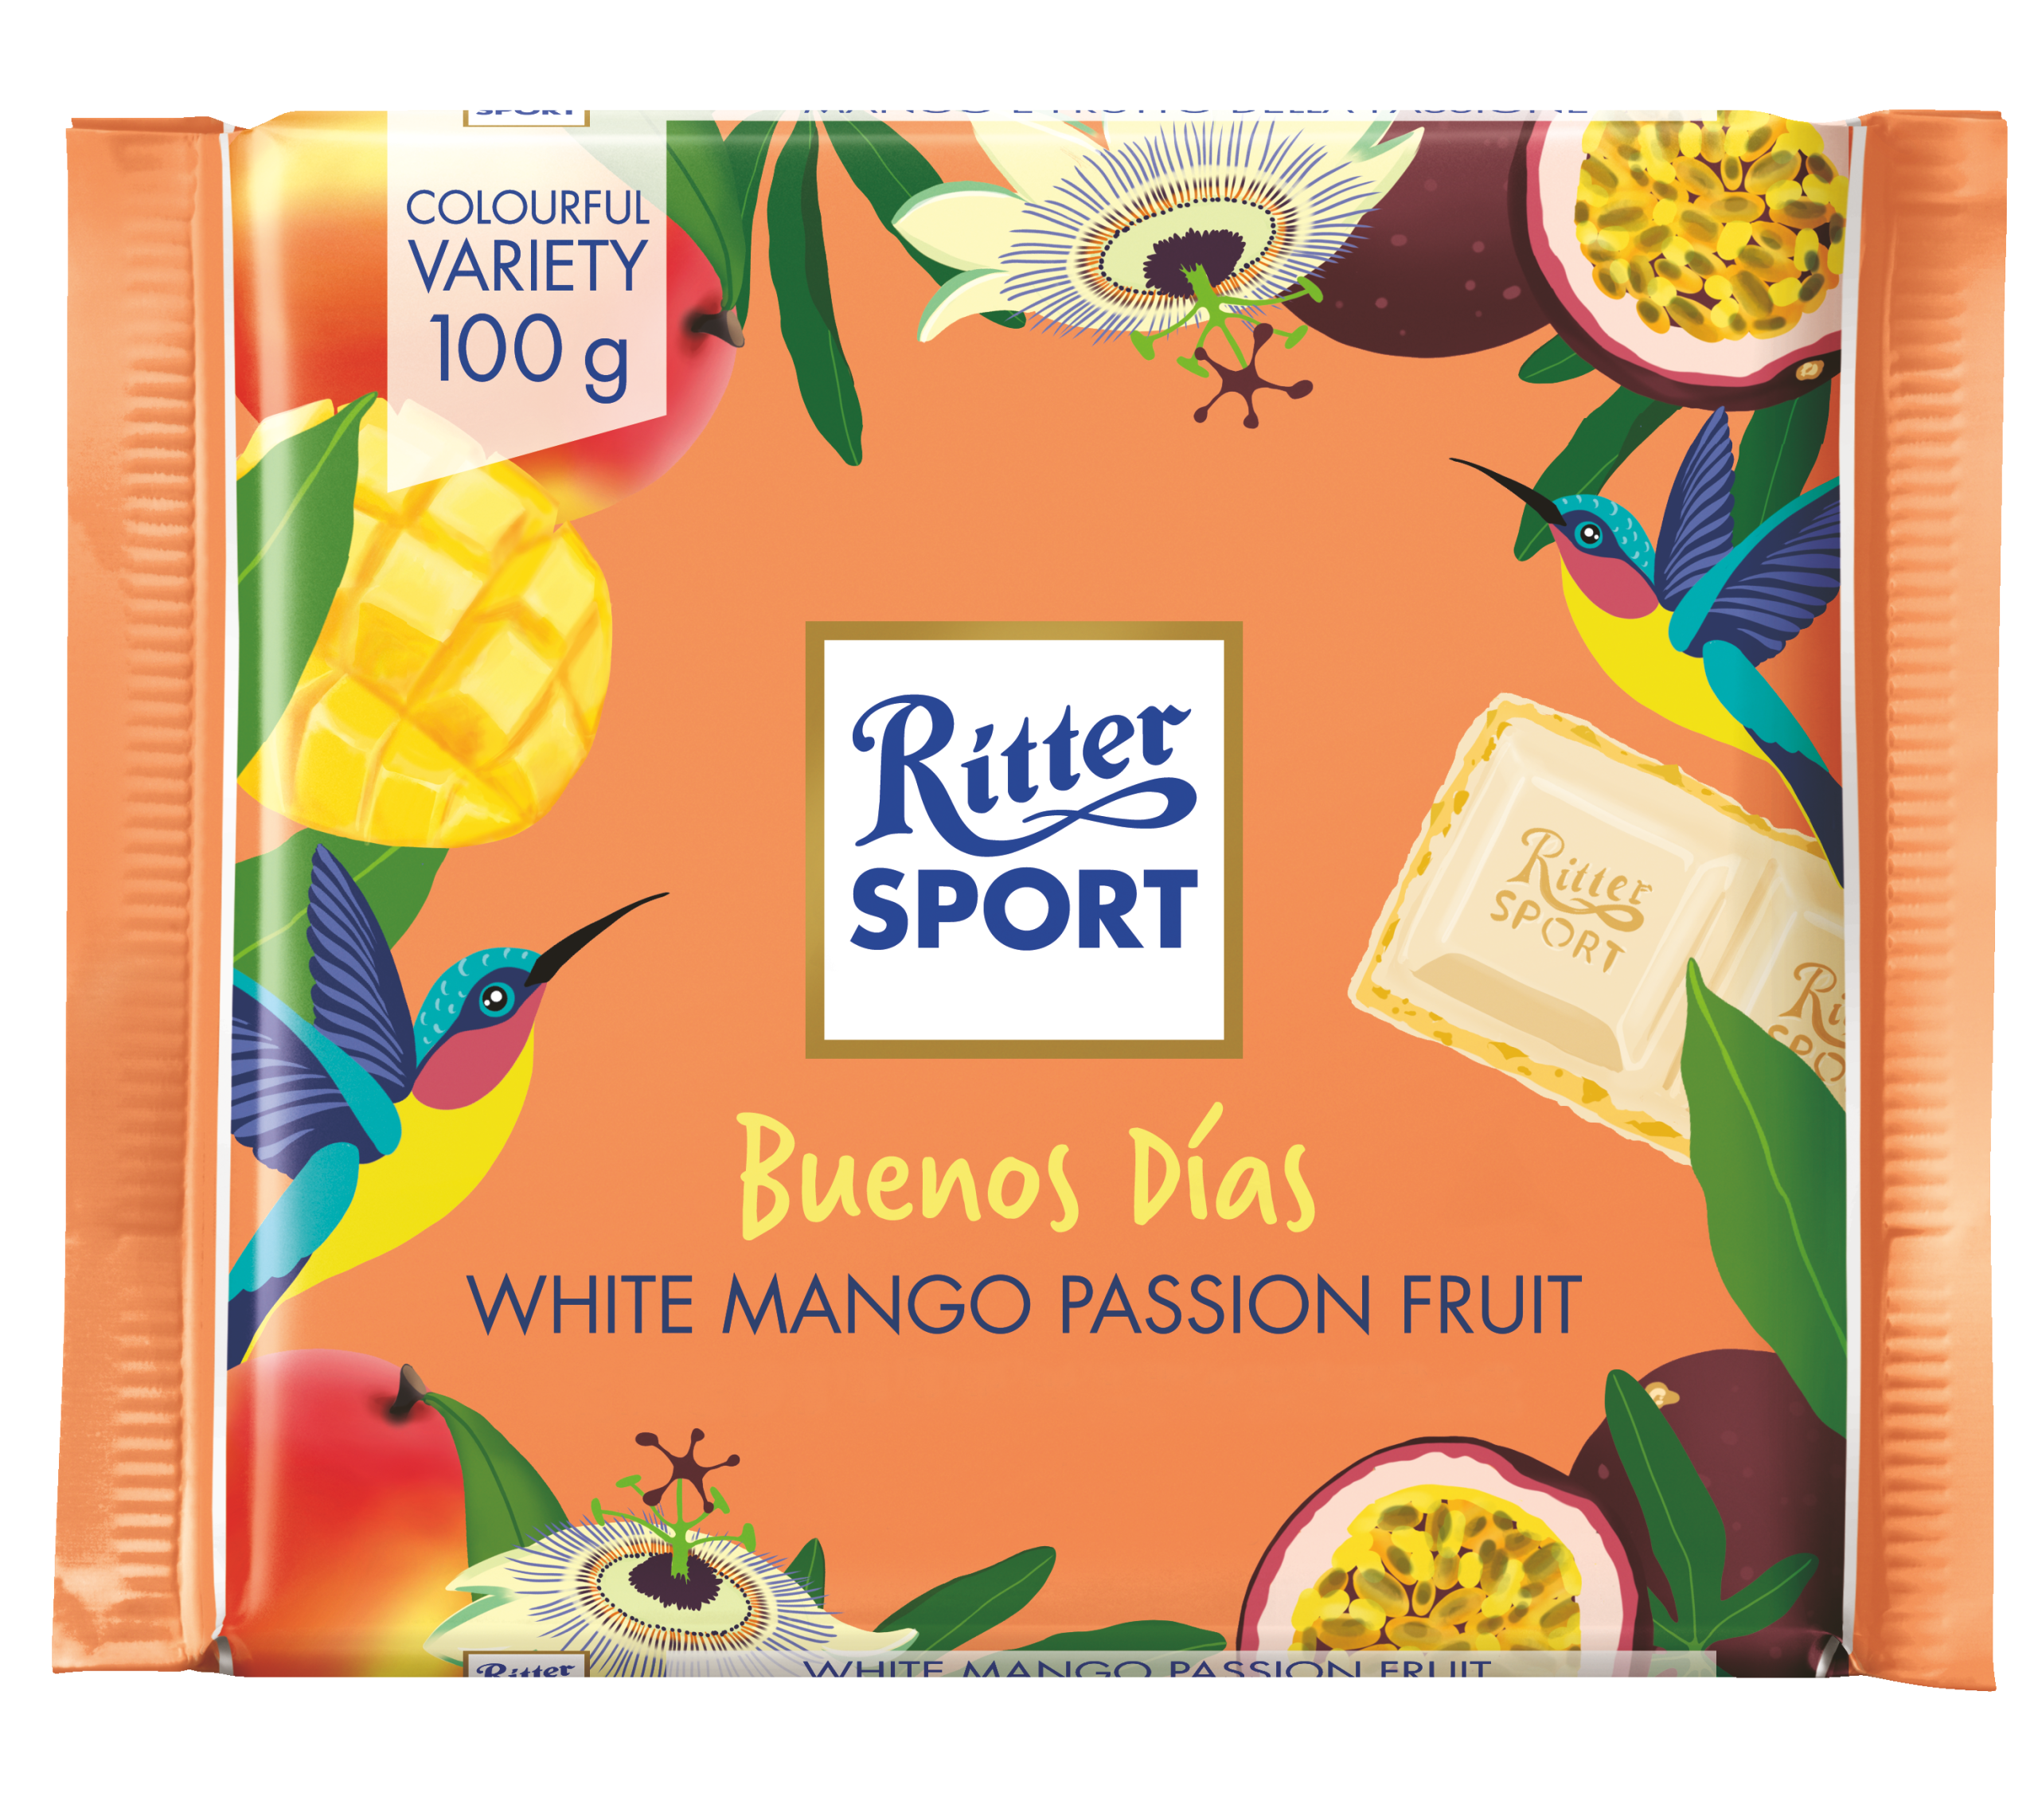 Ritter Sport bringing ‘Taste of the World’ back to stores